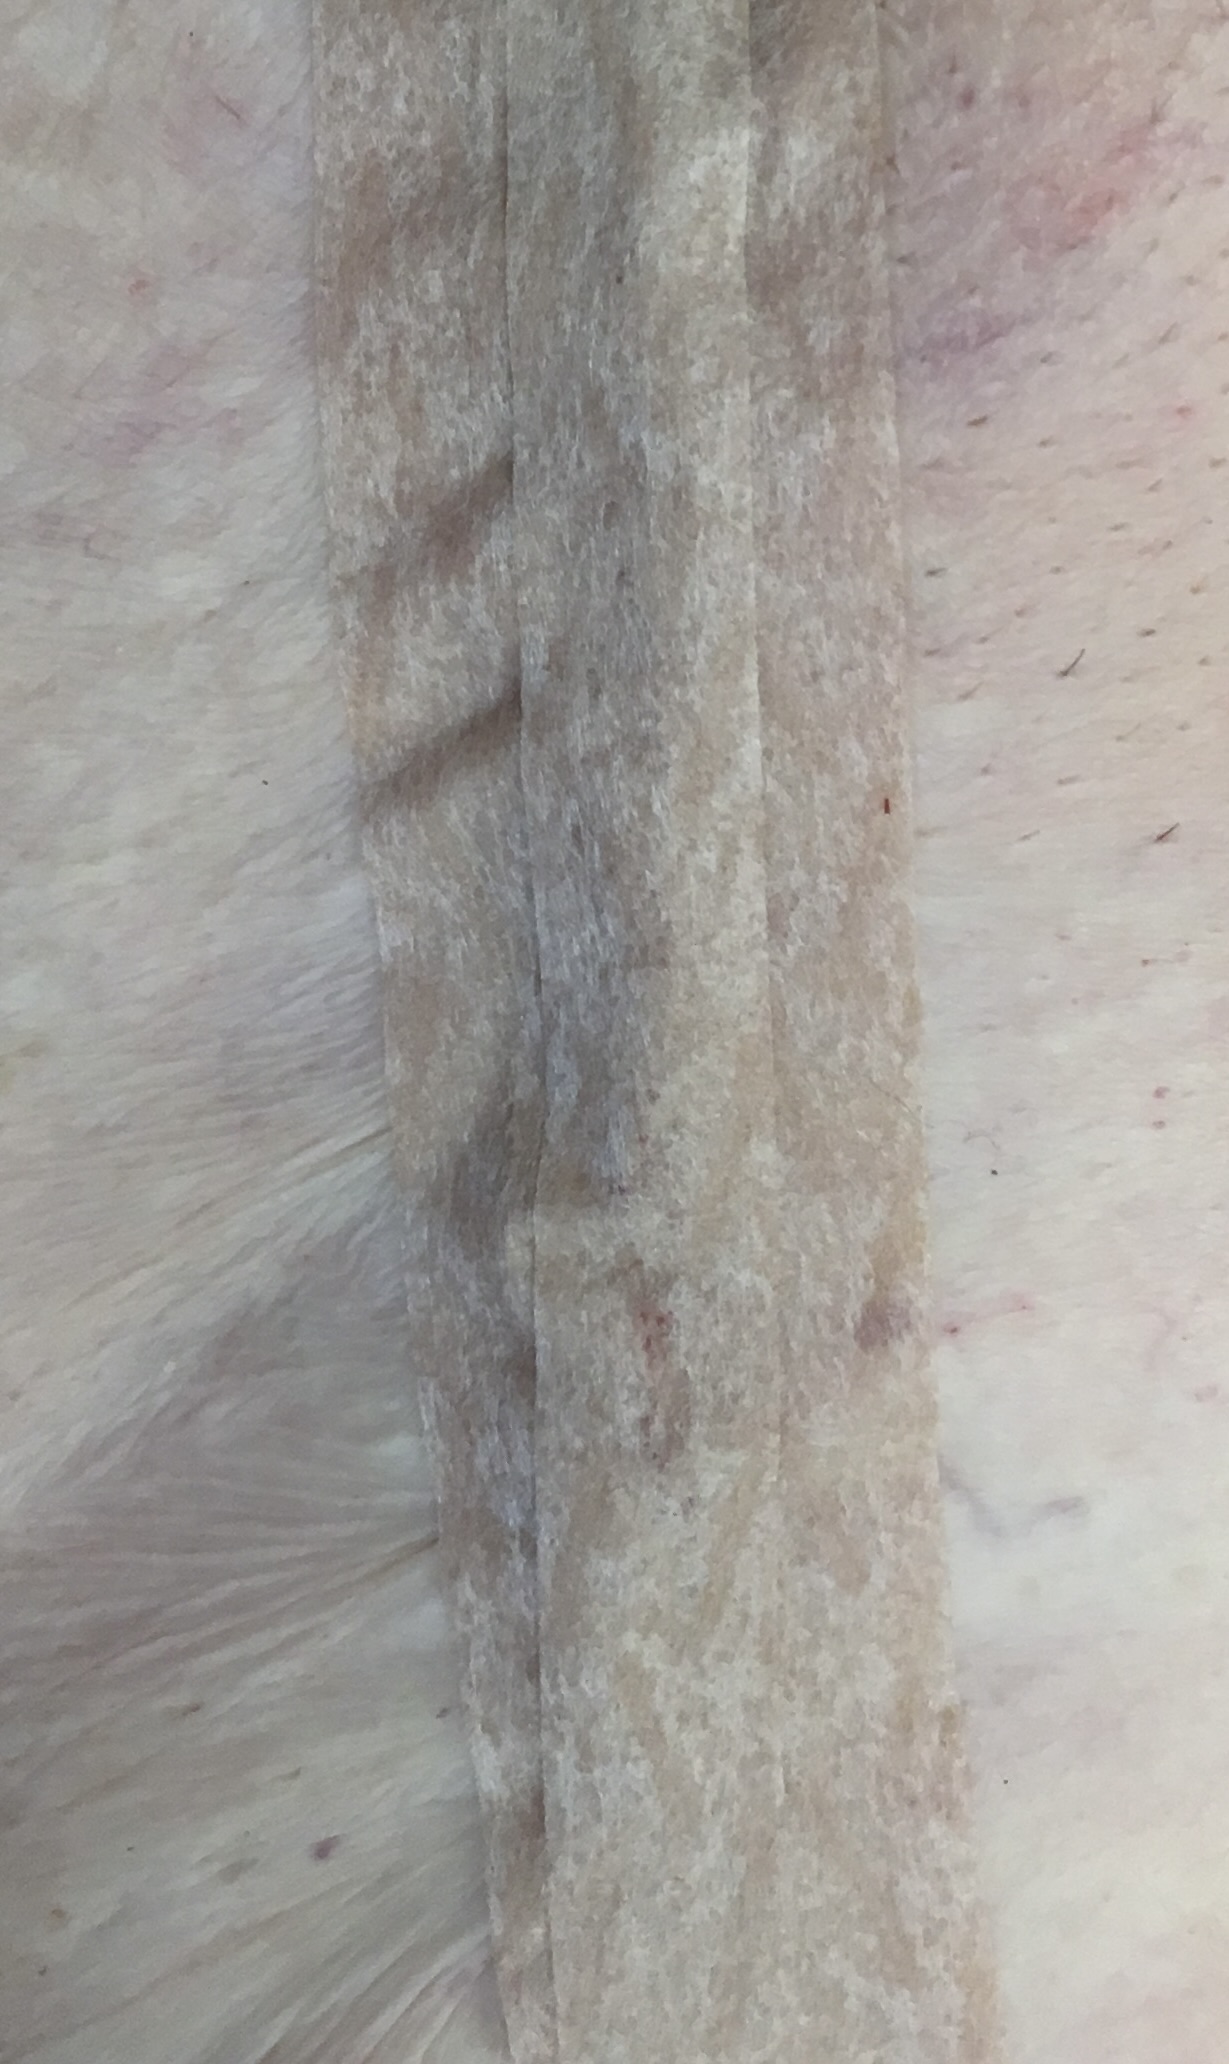 Post-op Wound Care